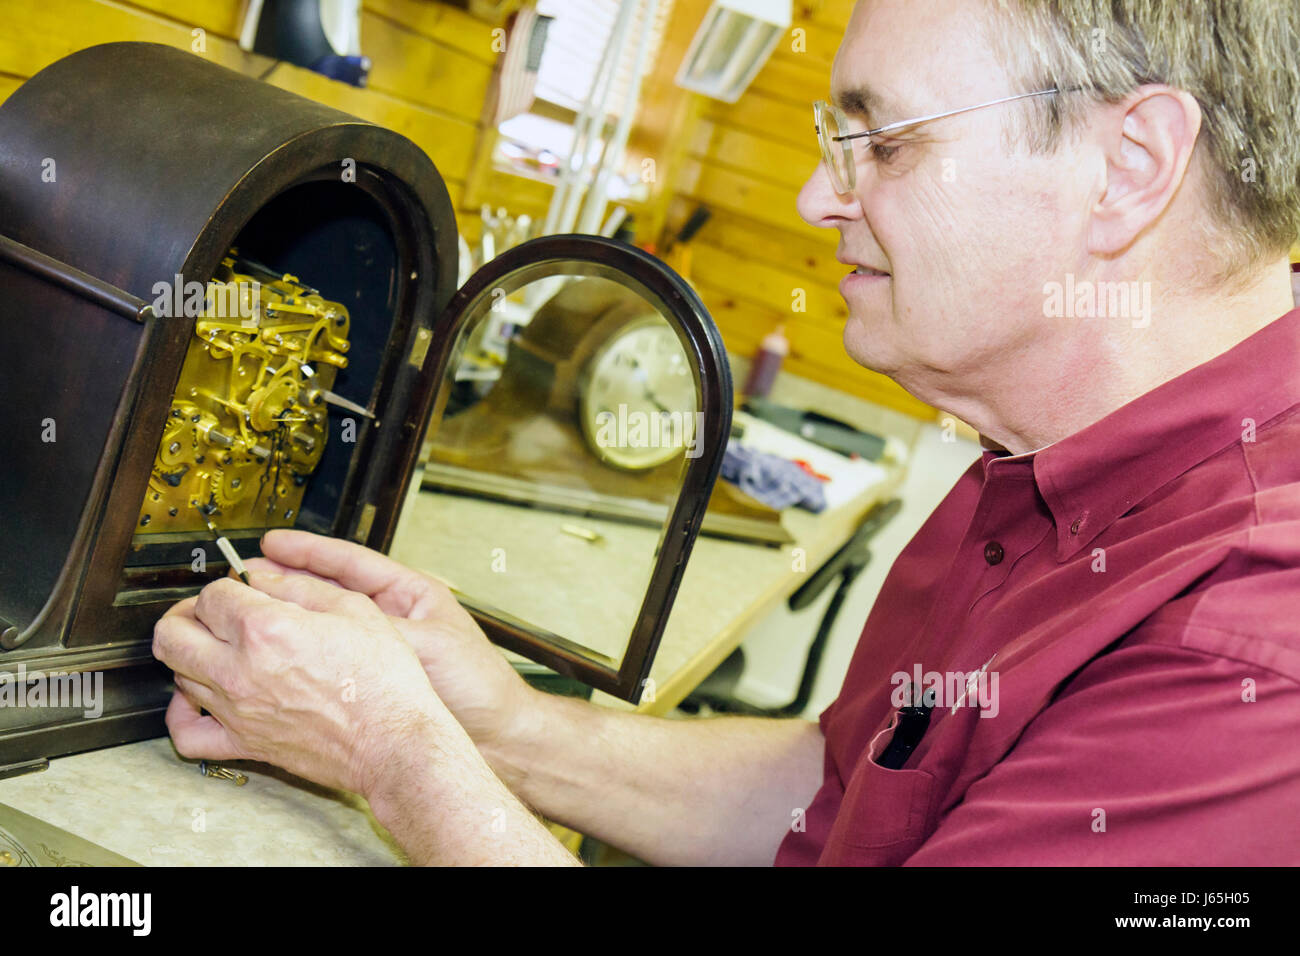 Michigan Frankenmuth,German Bavarian ethnic community,Frankenmuth Clock Company,display sale time,timepiece,mantle clock,man men male,clockmaker,sales Stock Photo